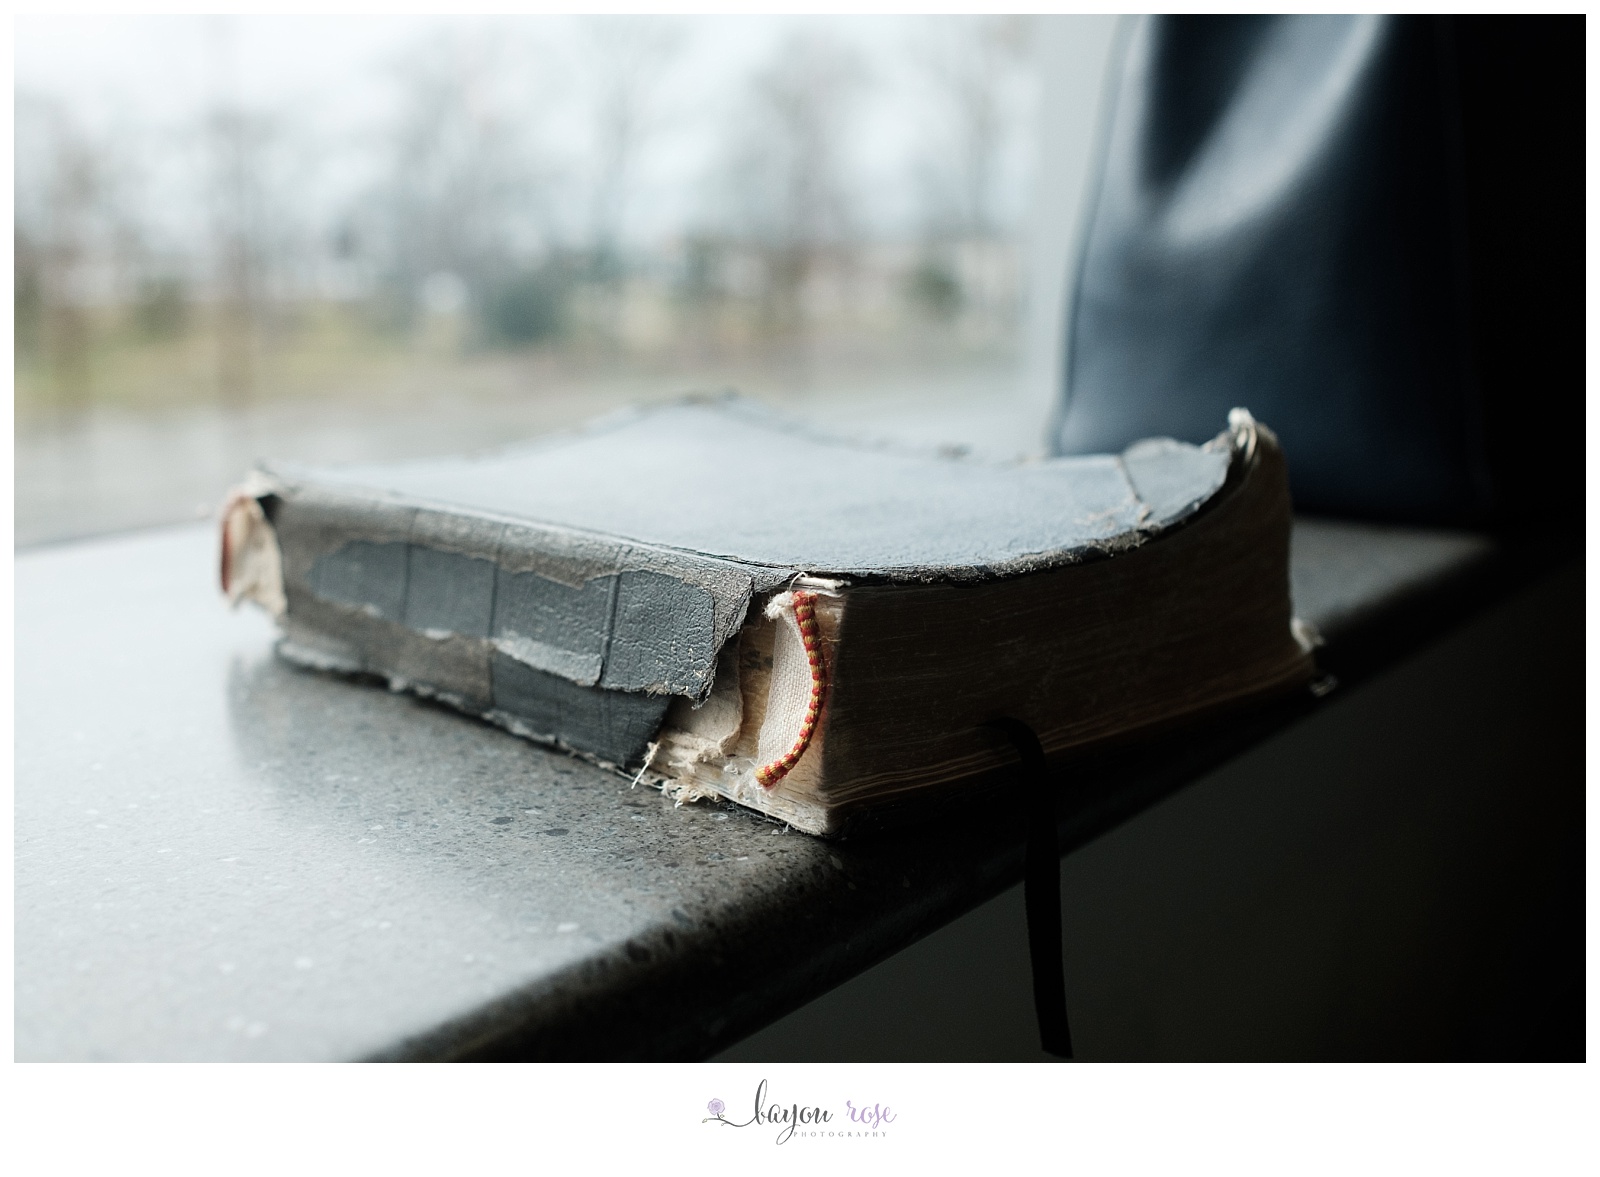 image of tattered family Bible